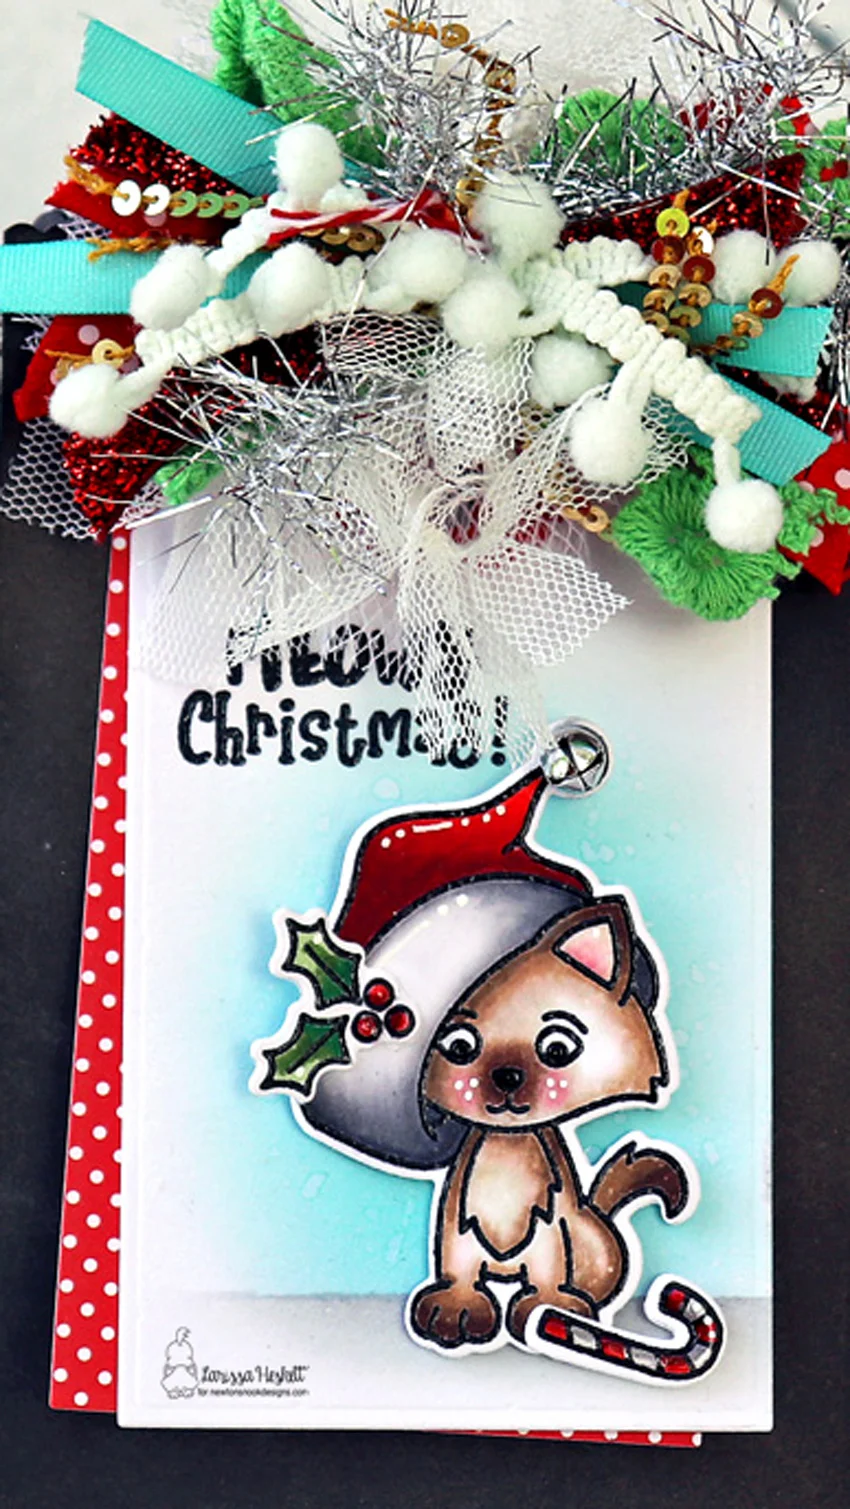 Meowy Christmas Gift Tag/Bag by Larissa Heskett for Newton's Nook Designs using A Kitten Christmas Stamp Set, A Kitten Christmas Die Set, Fancy Edges Tag Die #newtonsnook #newtonsnookdesigns #akittenchristmas #fancyedgetagdie #holidaytags